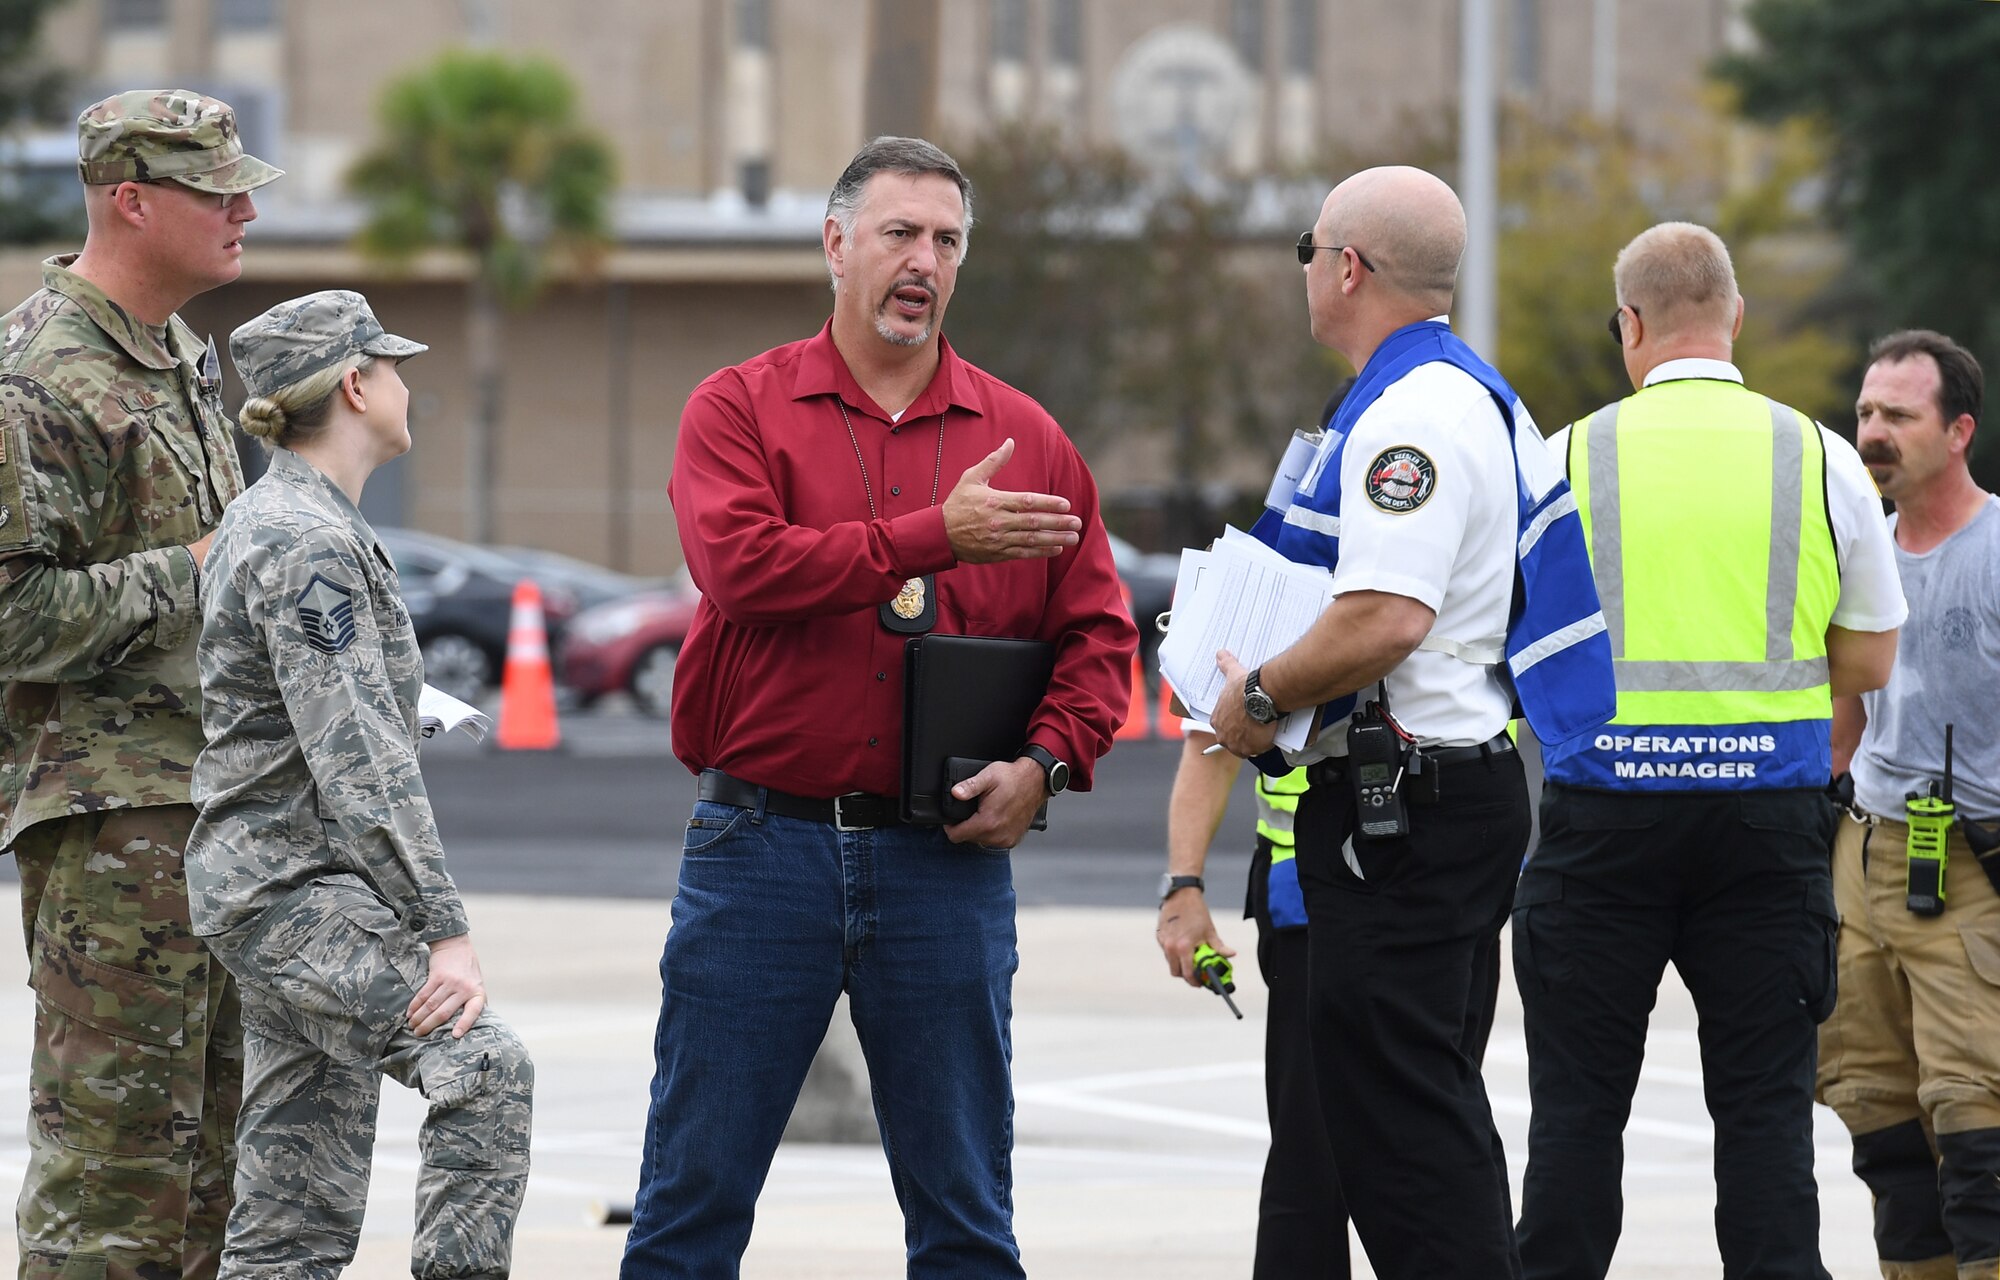 Bill Mays, 81st Training Wing wing inspection team lead, speaks with inspection team members during the Anti-Terrorism, Force Protection Condition and Chemical, Biological, Radiological, Nuclear and high-yield Explosives training exercise near the Live Oak Dining Facility at Keesler Air Force Base, Mississippi, Oct. 24, 2019. The exercise scenario simulated a gym bag with ricin found by Keesler personnel who alerted first responders. The exercise was conducted to evaluate the mission readiness and security of Keesler. (U.S. Air Force photo by Kemberly Groue)